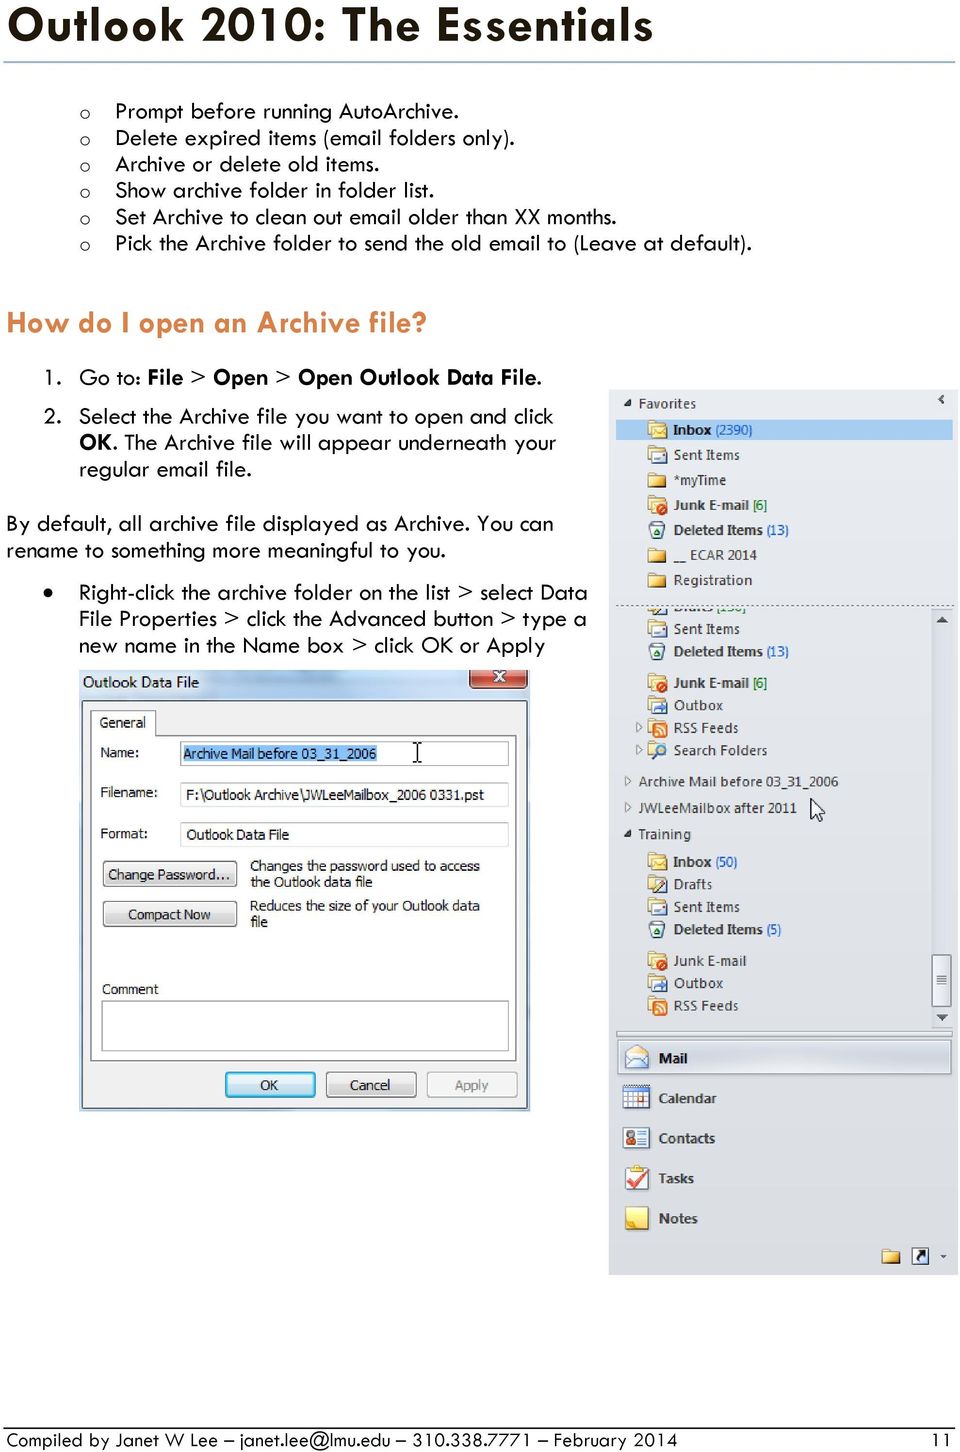 2. Select the Archive file you want to open and click OK. The Archive file will appear underneath your regular email file. By default, all archive file displayed as Archive.